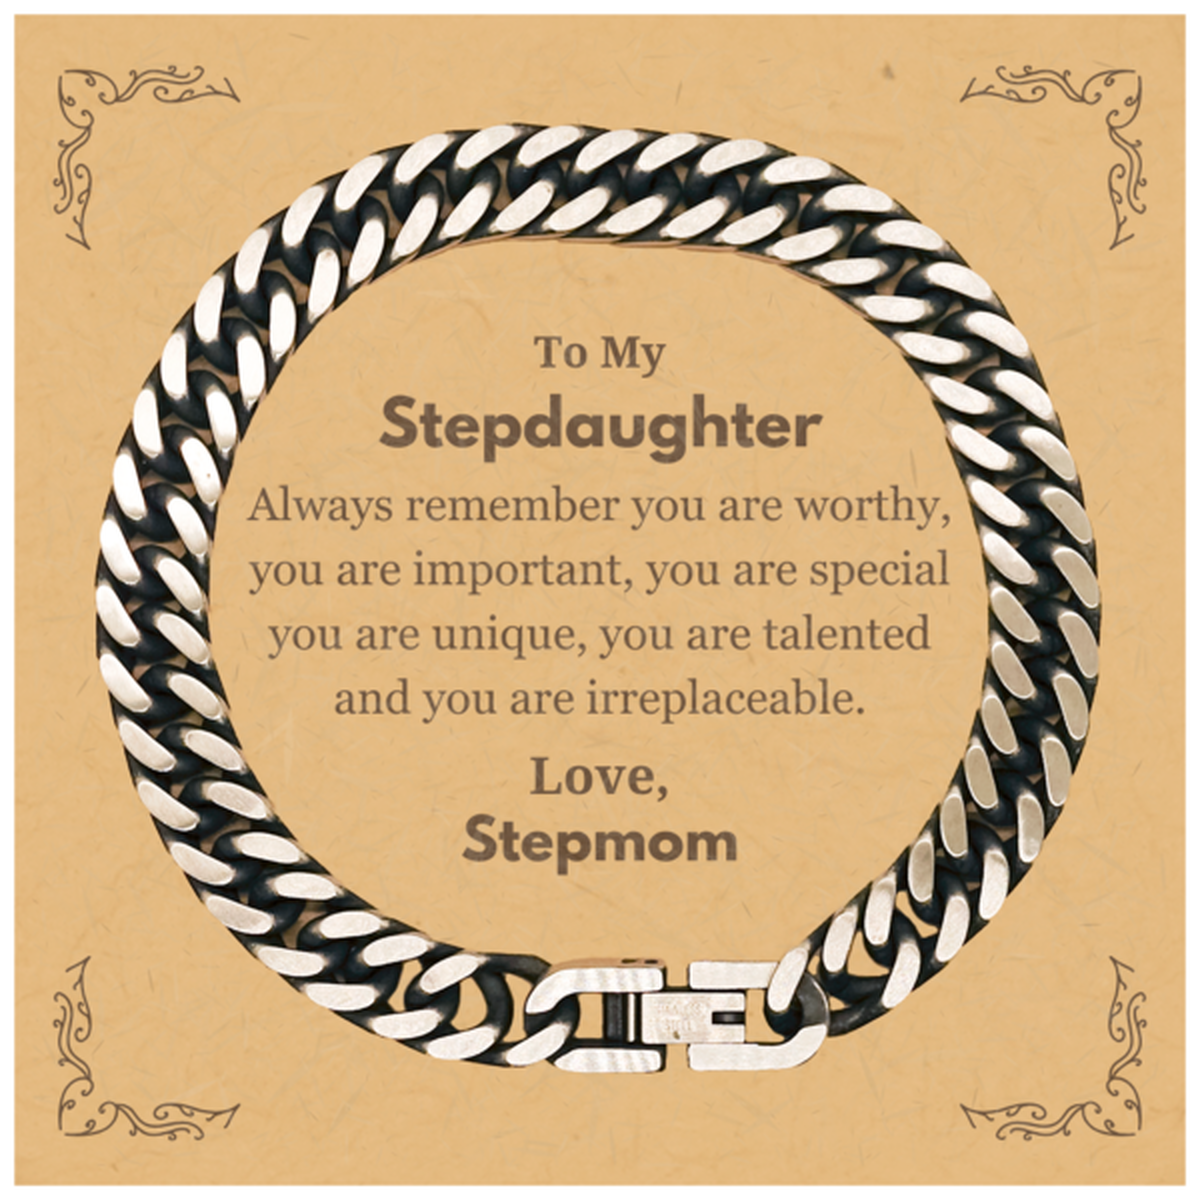 Stepdaughter Birthday Gifts from Stepmom, Inspirational Cuban Link Chain Bracelet for Stepdaughter Christmas Graduation Gifts for Stepdaughter Always remember you are worthy, you are important. Love, Stepmom